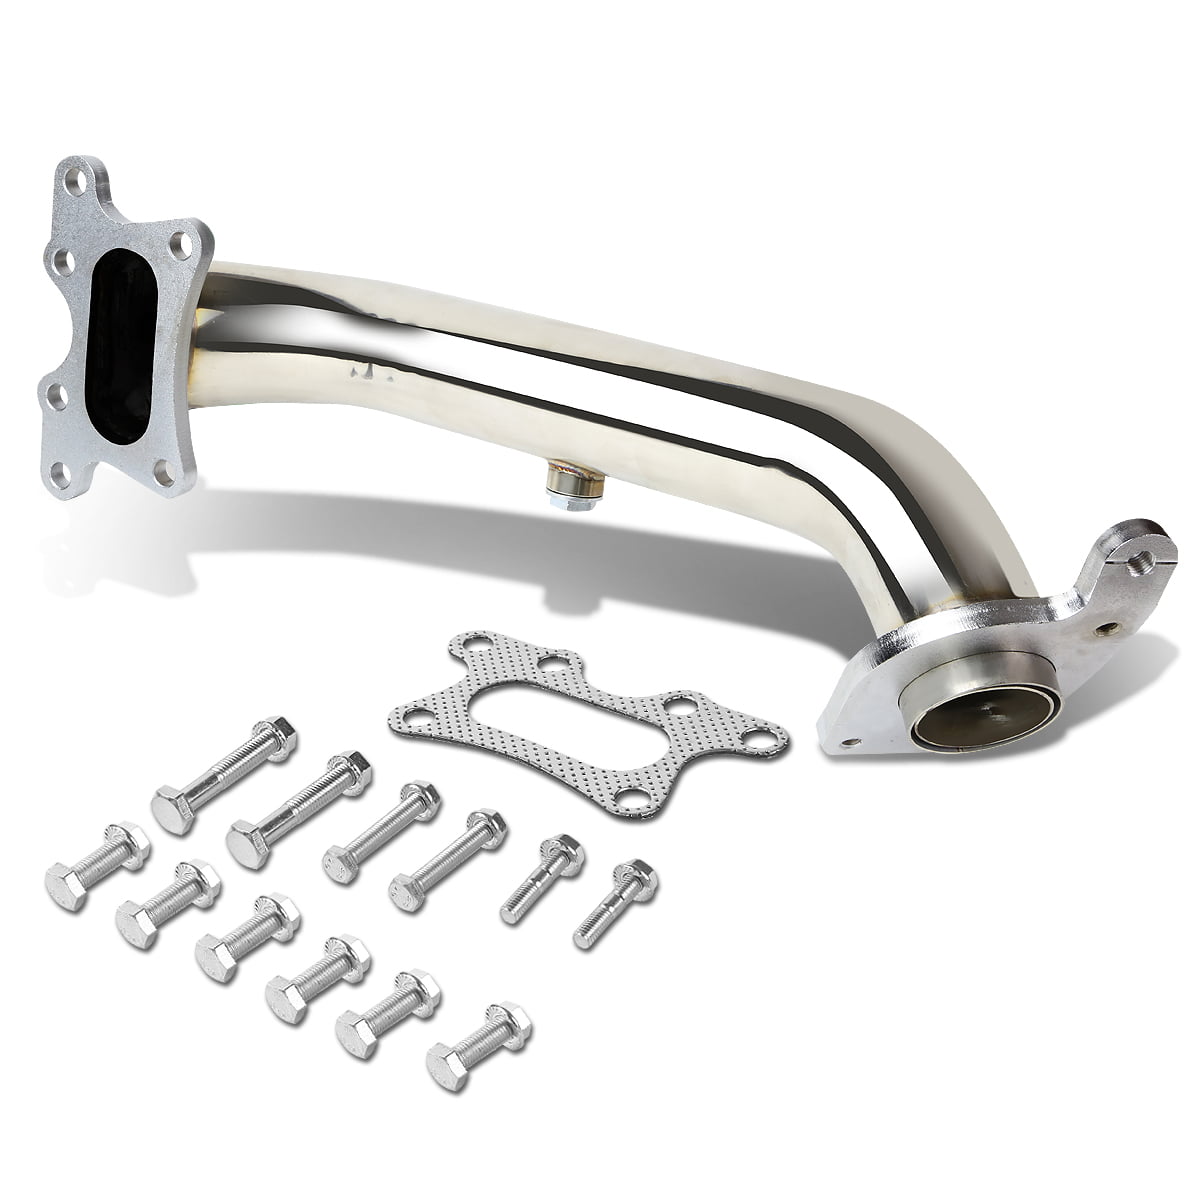 For Honda Civic FA/FG 1.8L l4 Stainless Steel Racing Exhuast Header